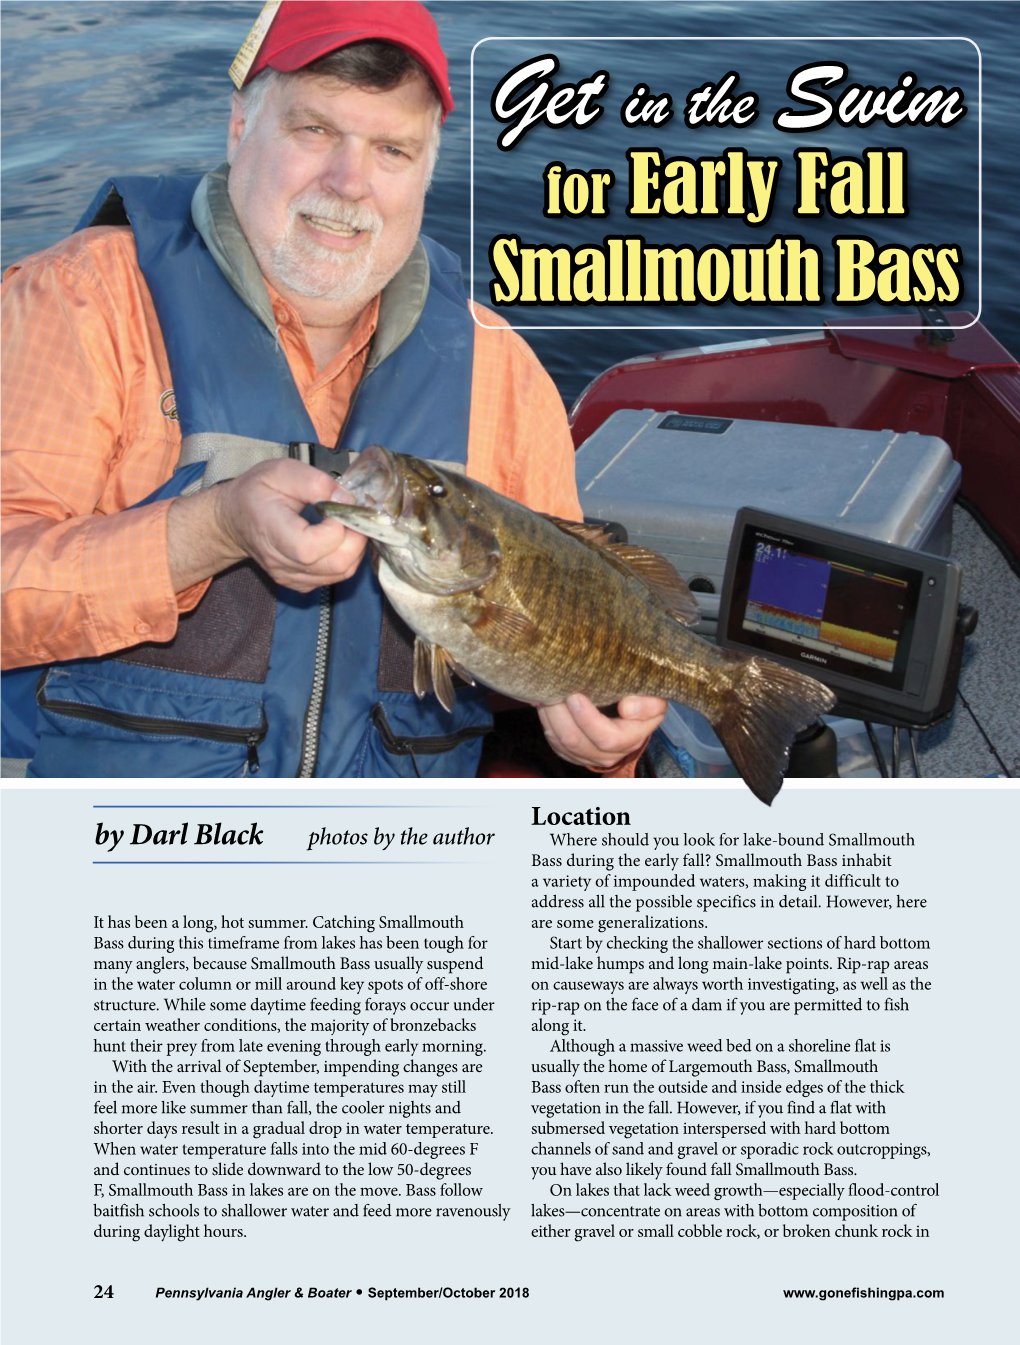 For Early Fall Smallmouth Bass